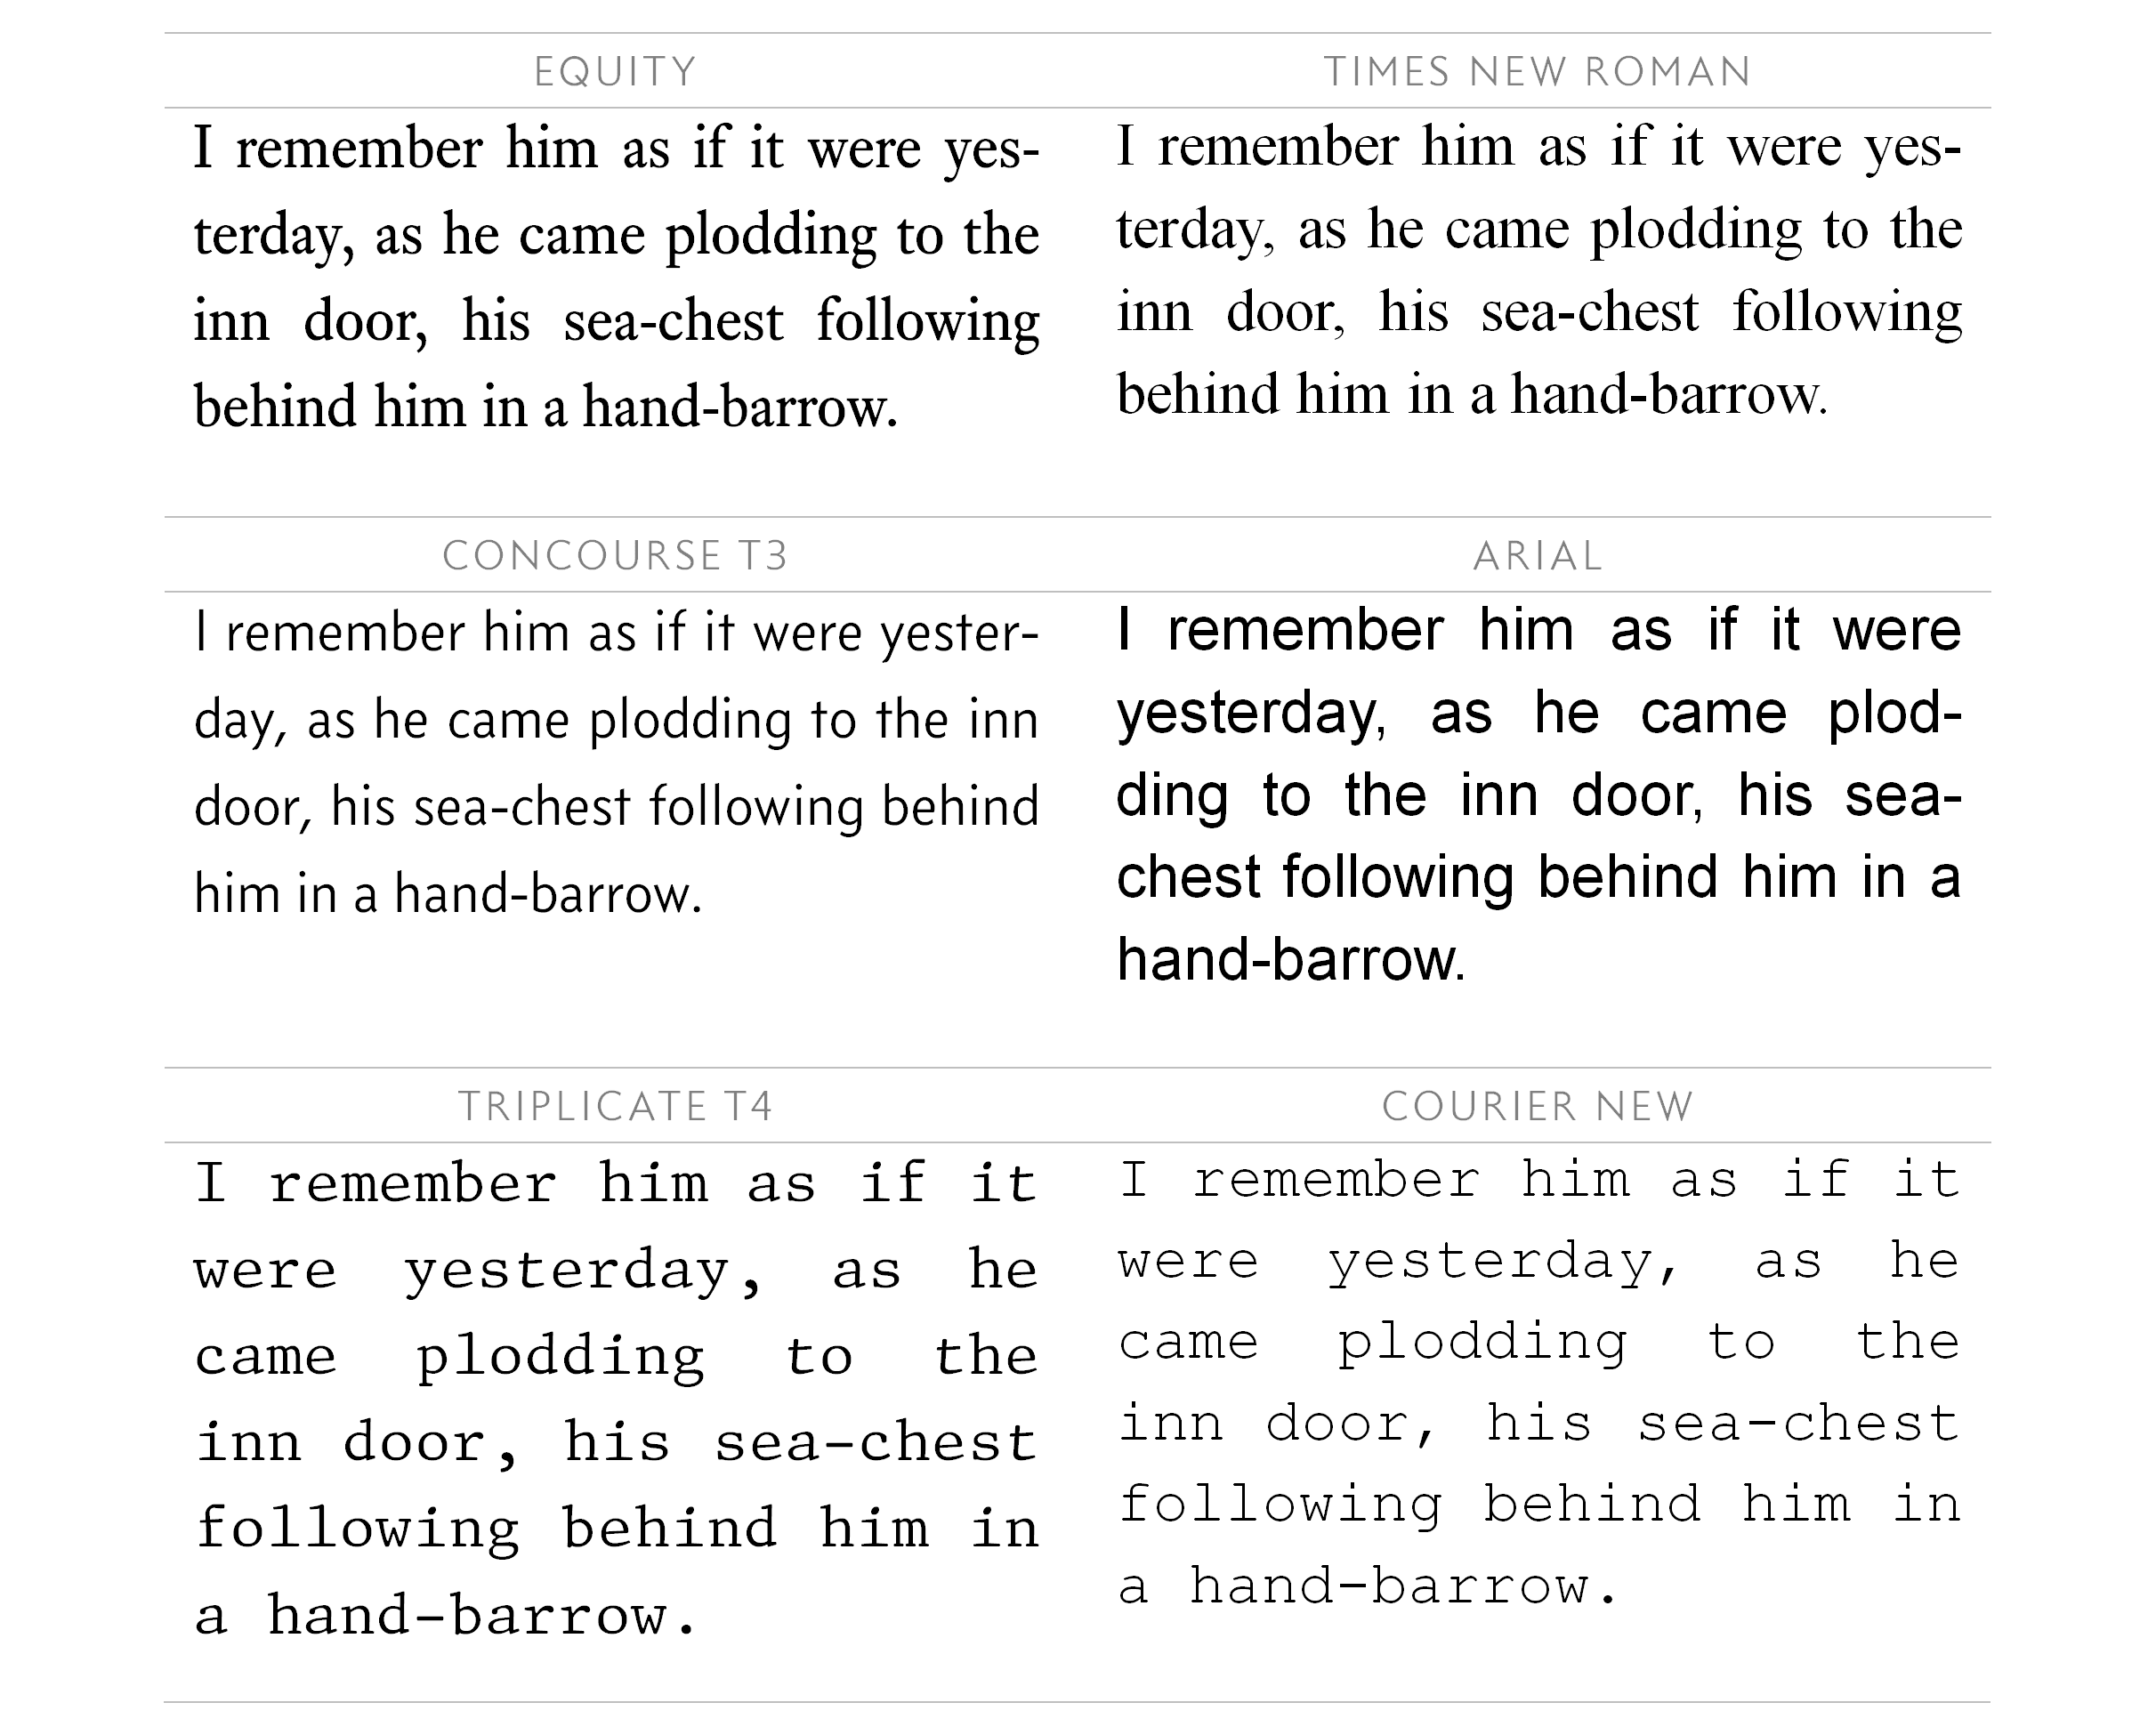 Table 3.1 - A comparison of the Equity fonts